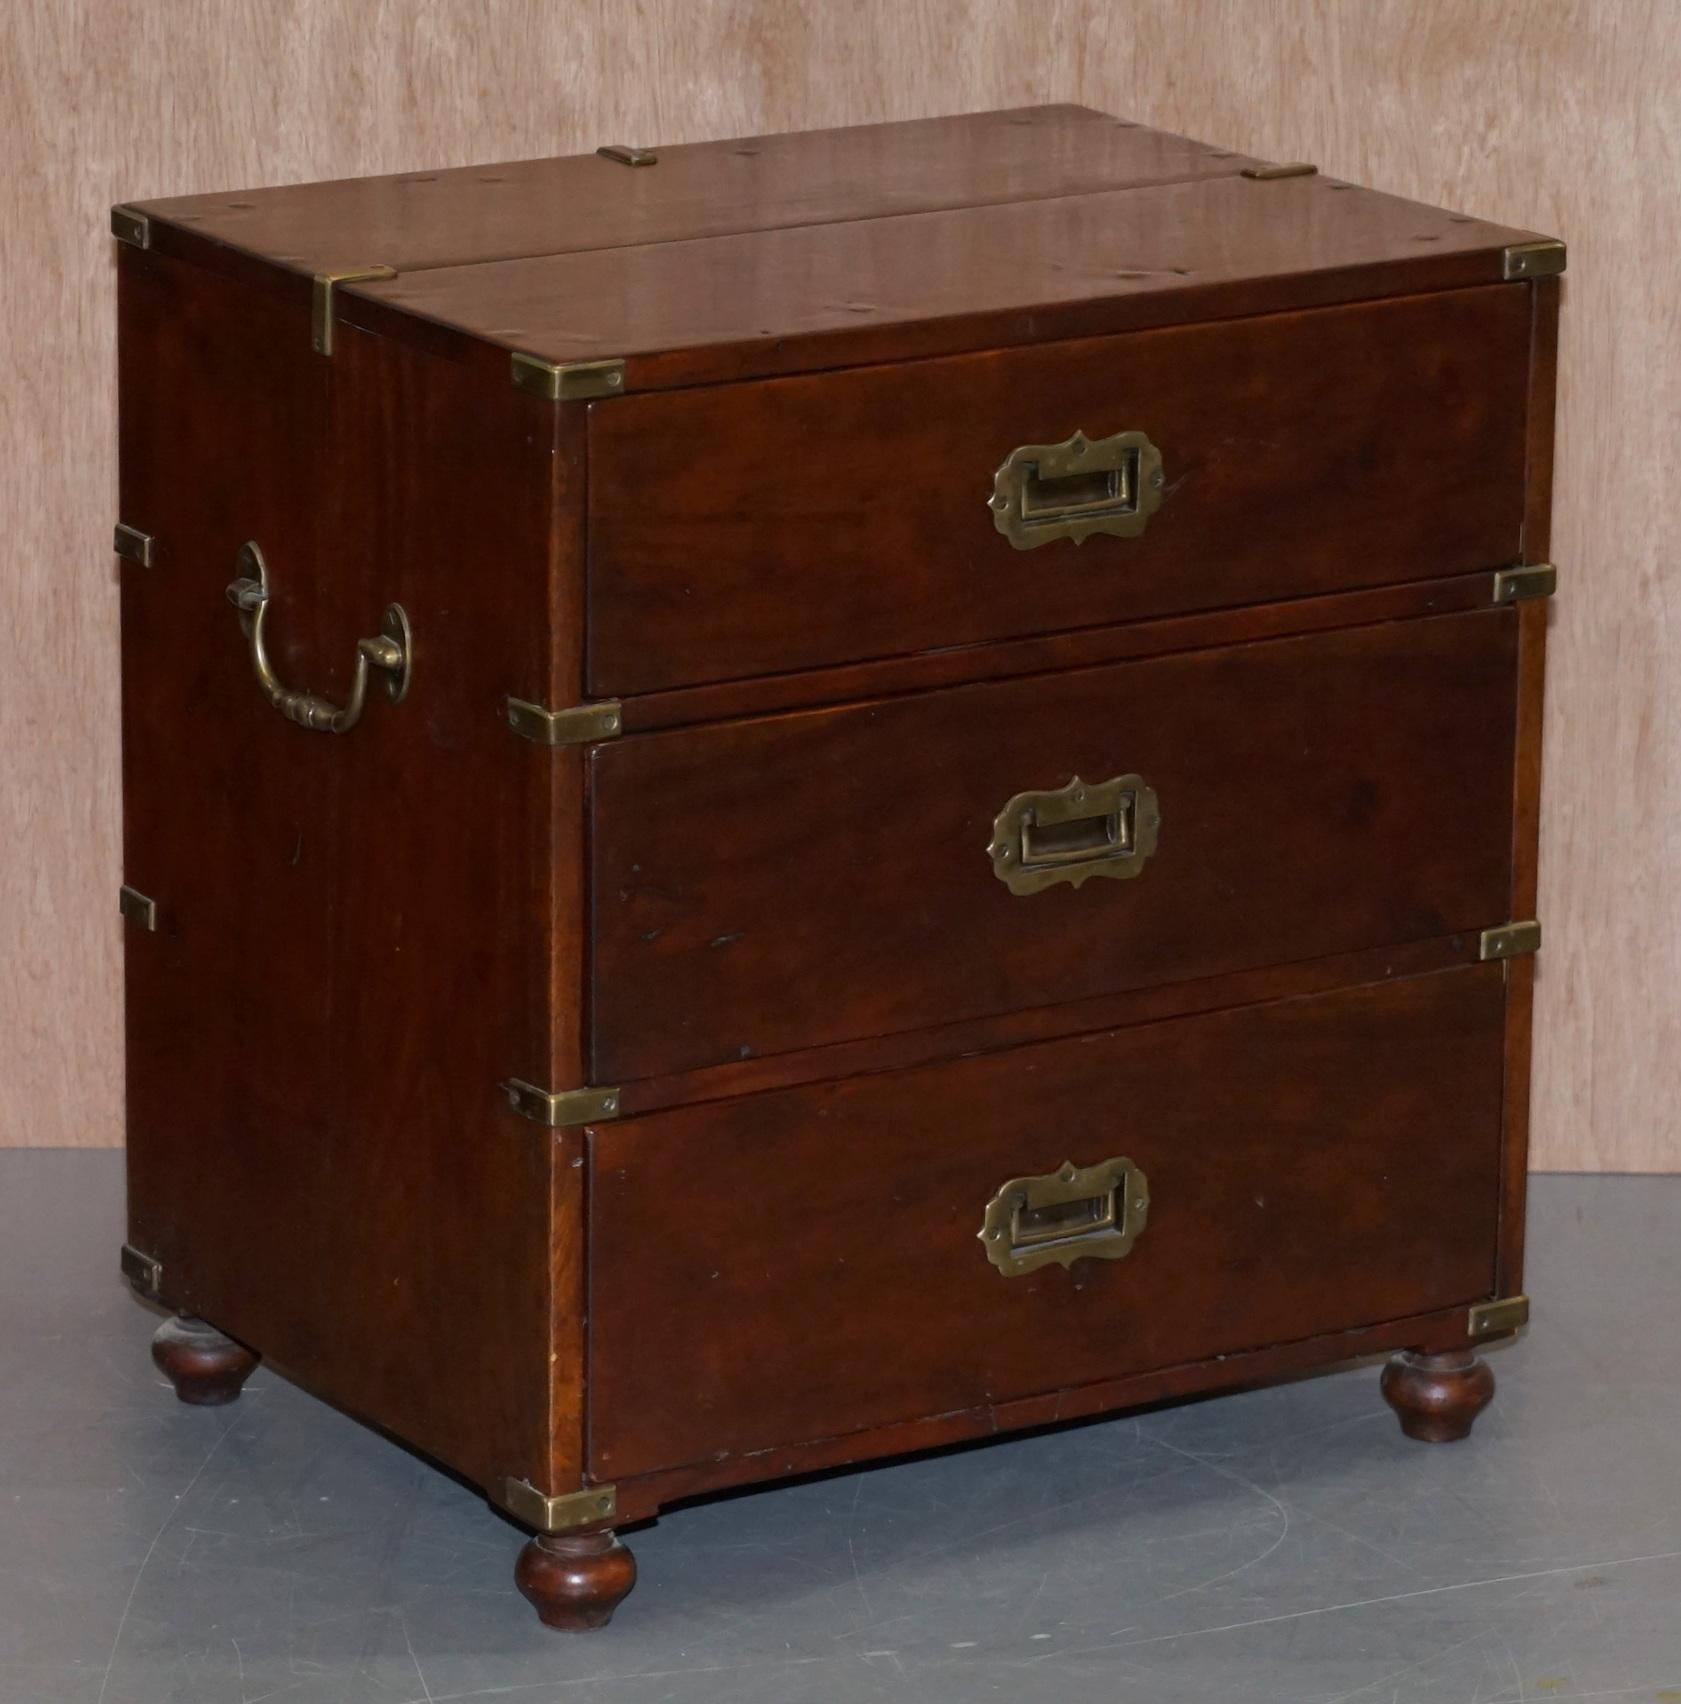 We are delighted to offer for sale this stunning pair of vintage solid wood with oversized stud work Anglo-Indian Campaign drawers

A very good looking well-made and substantial pair of drawers, they are bedside or lamp end wine table sized, very